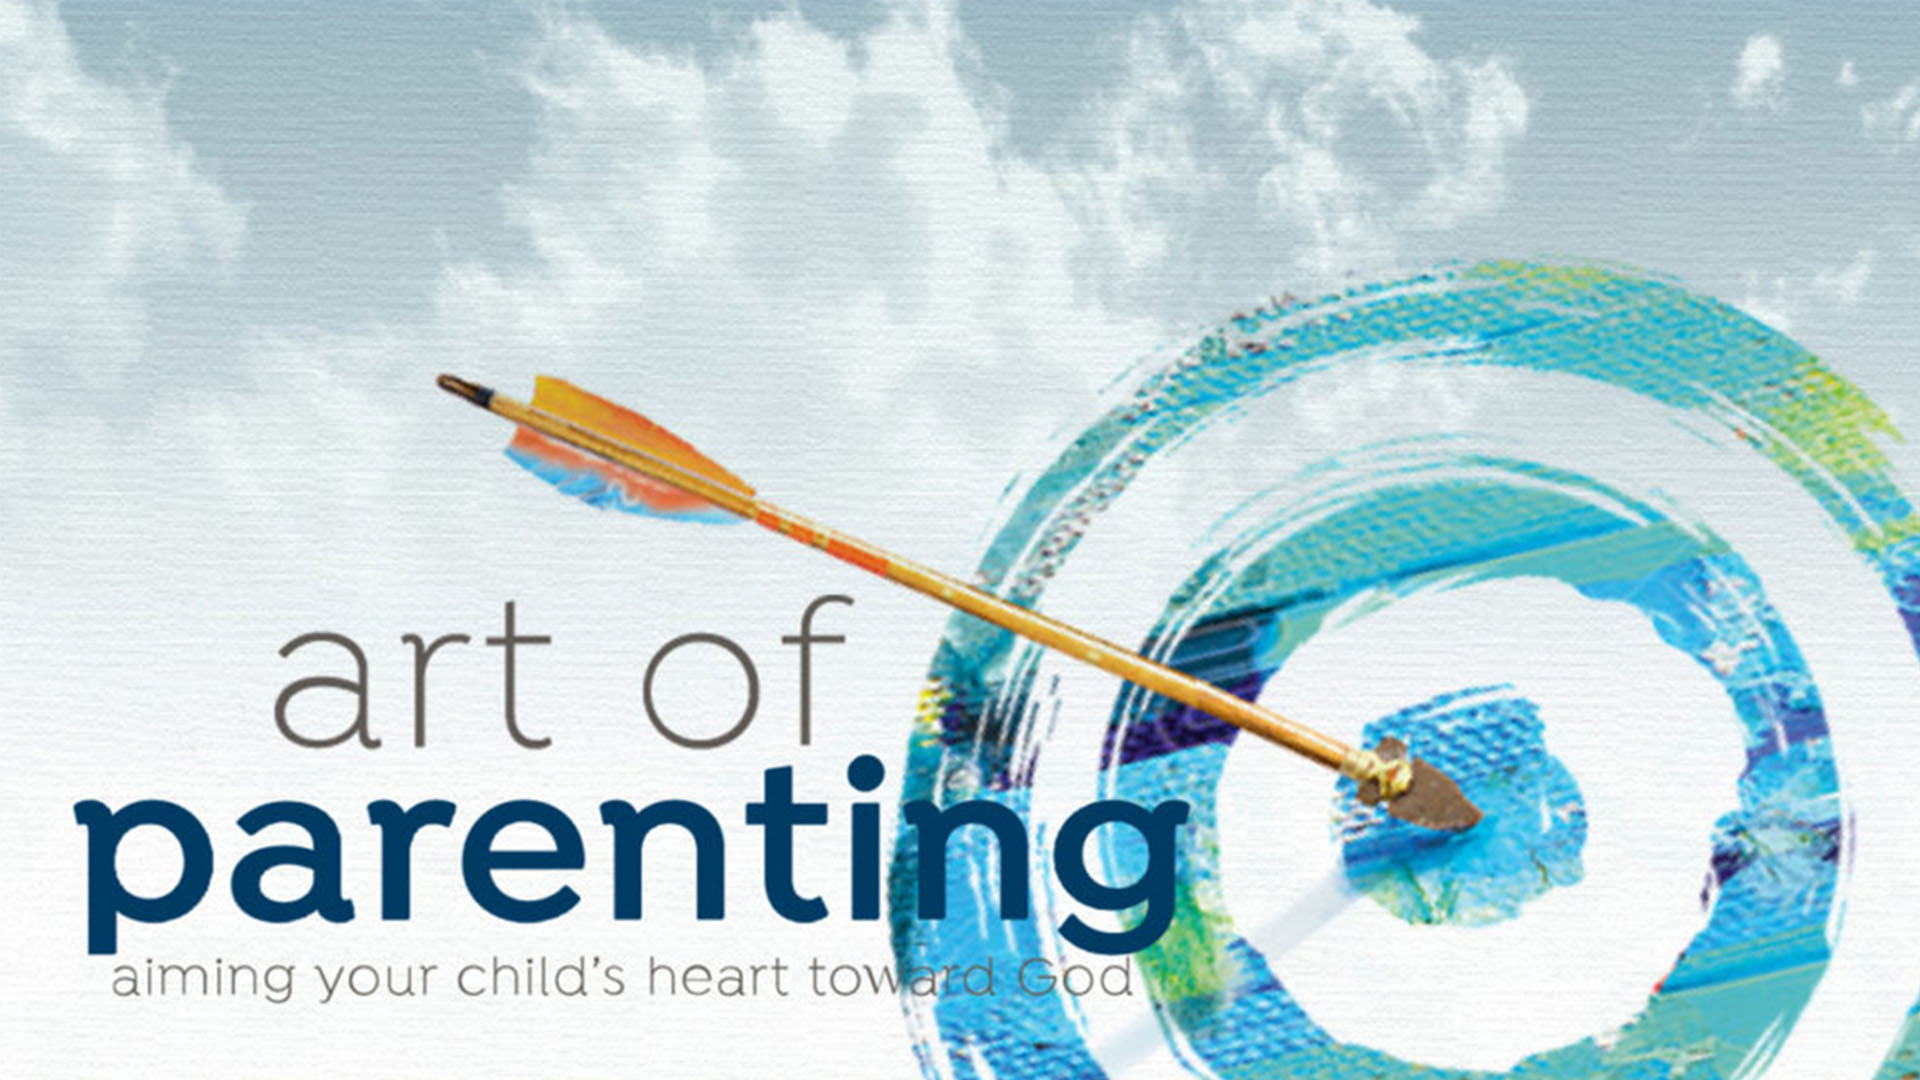 The Art Of Parenting

8-Week Series
Saturdays | 5:00-6:15pm
February 4 - March 25
Childcare provided
